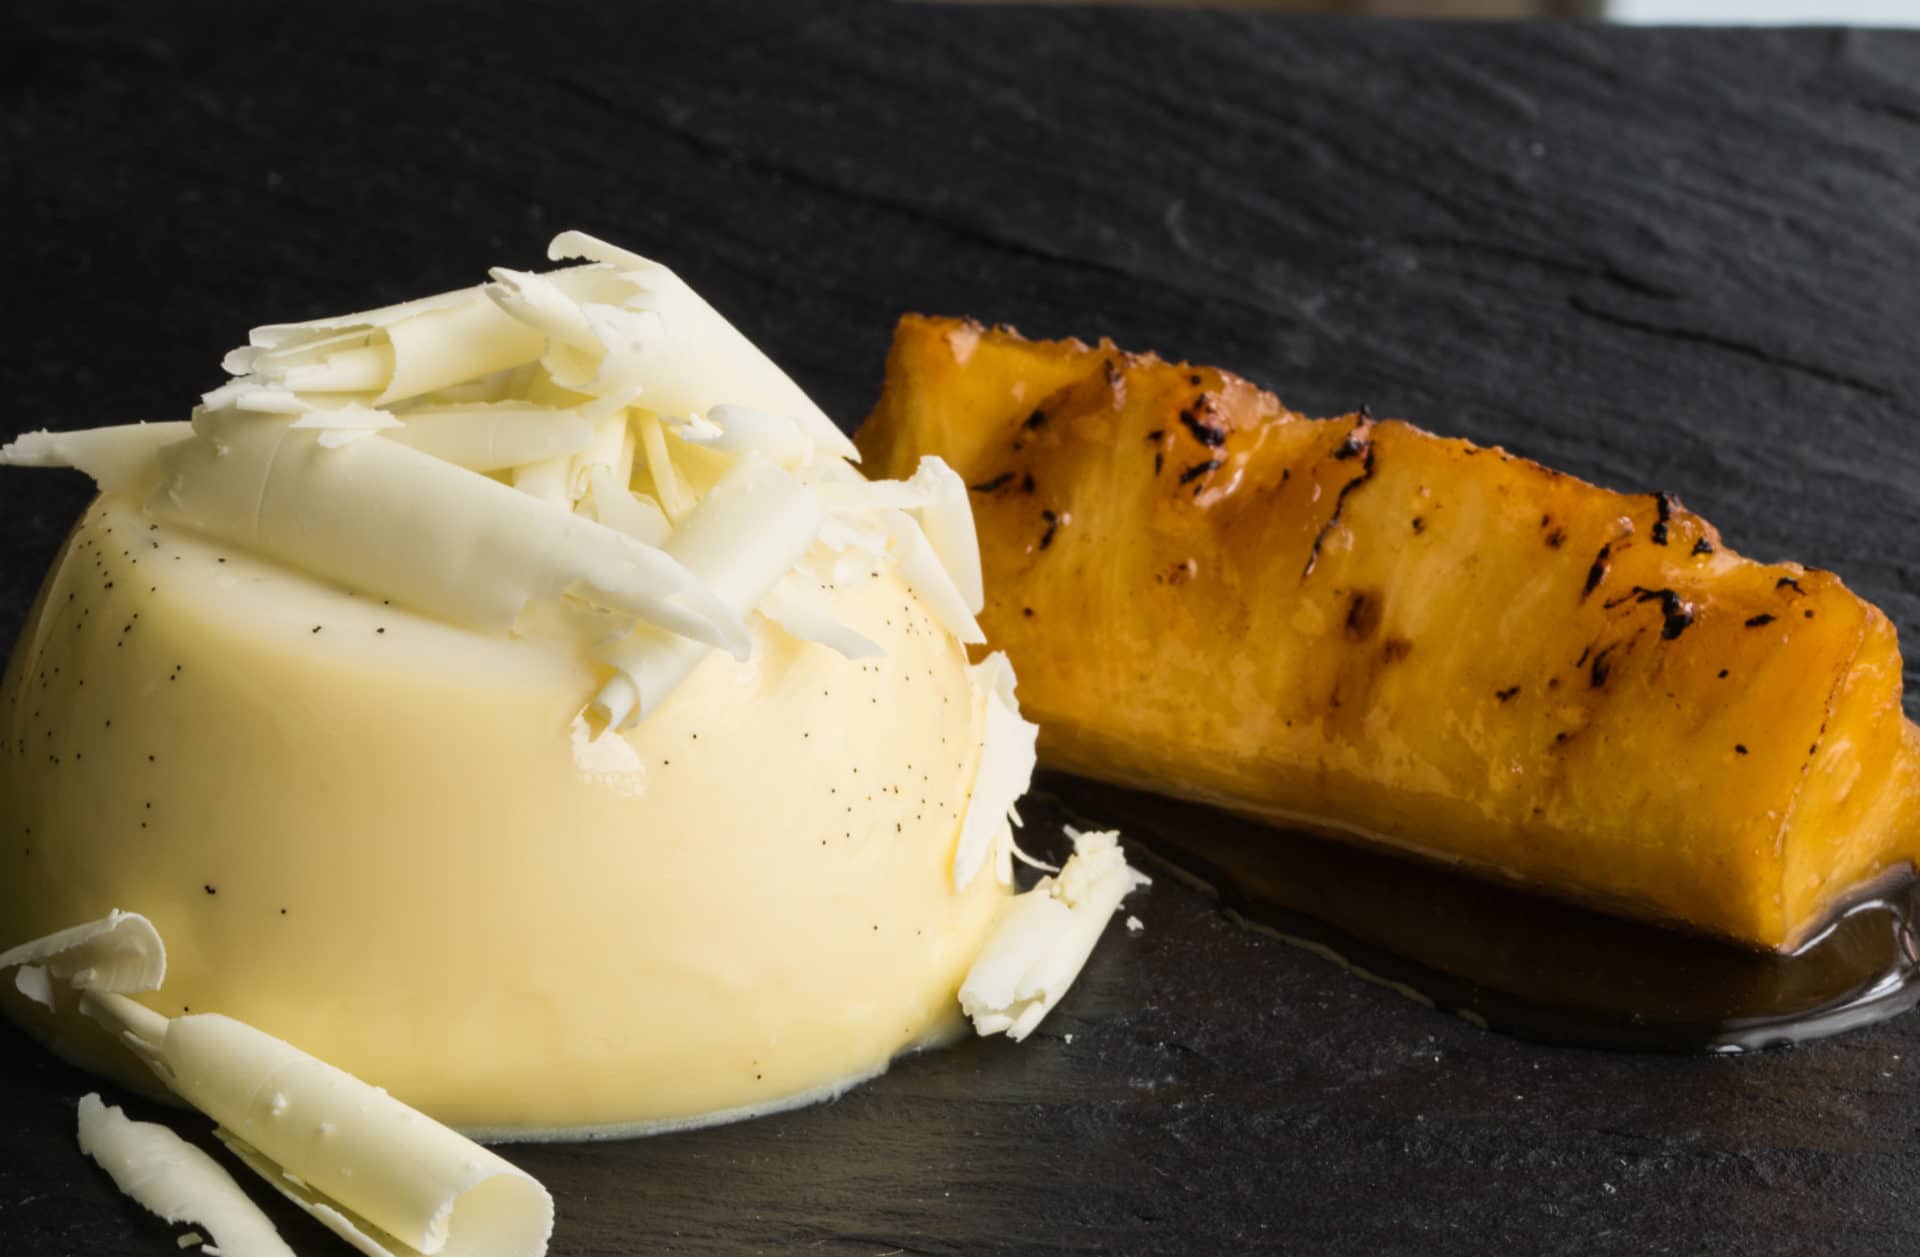 A white chocolate panna cotta, topped with white chocolate shavings, and served with roast pineapple